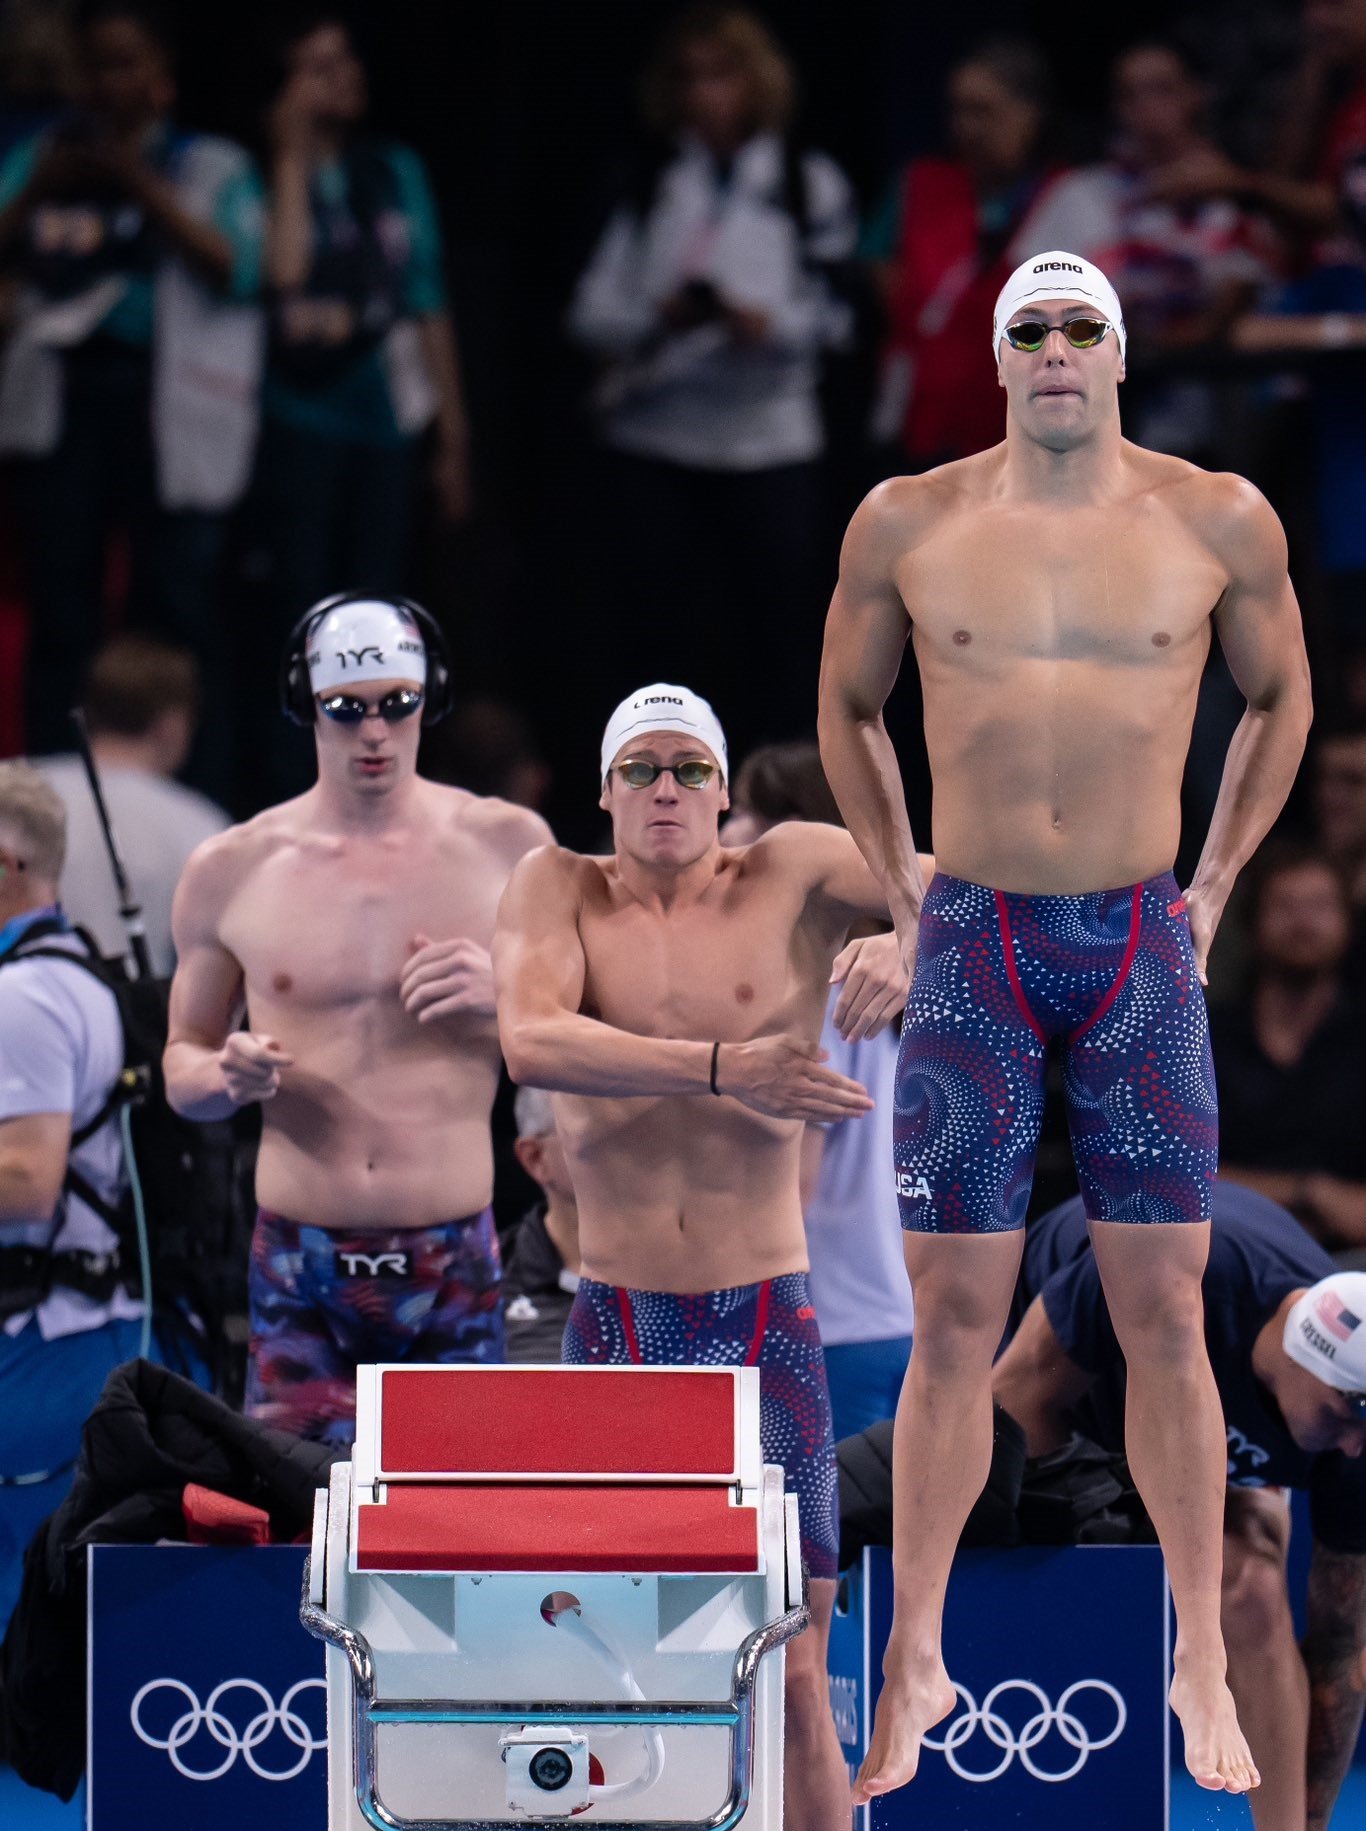 USA wins gold in men’s 4x100M freestyle relay final 7